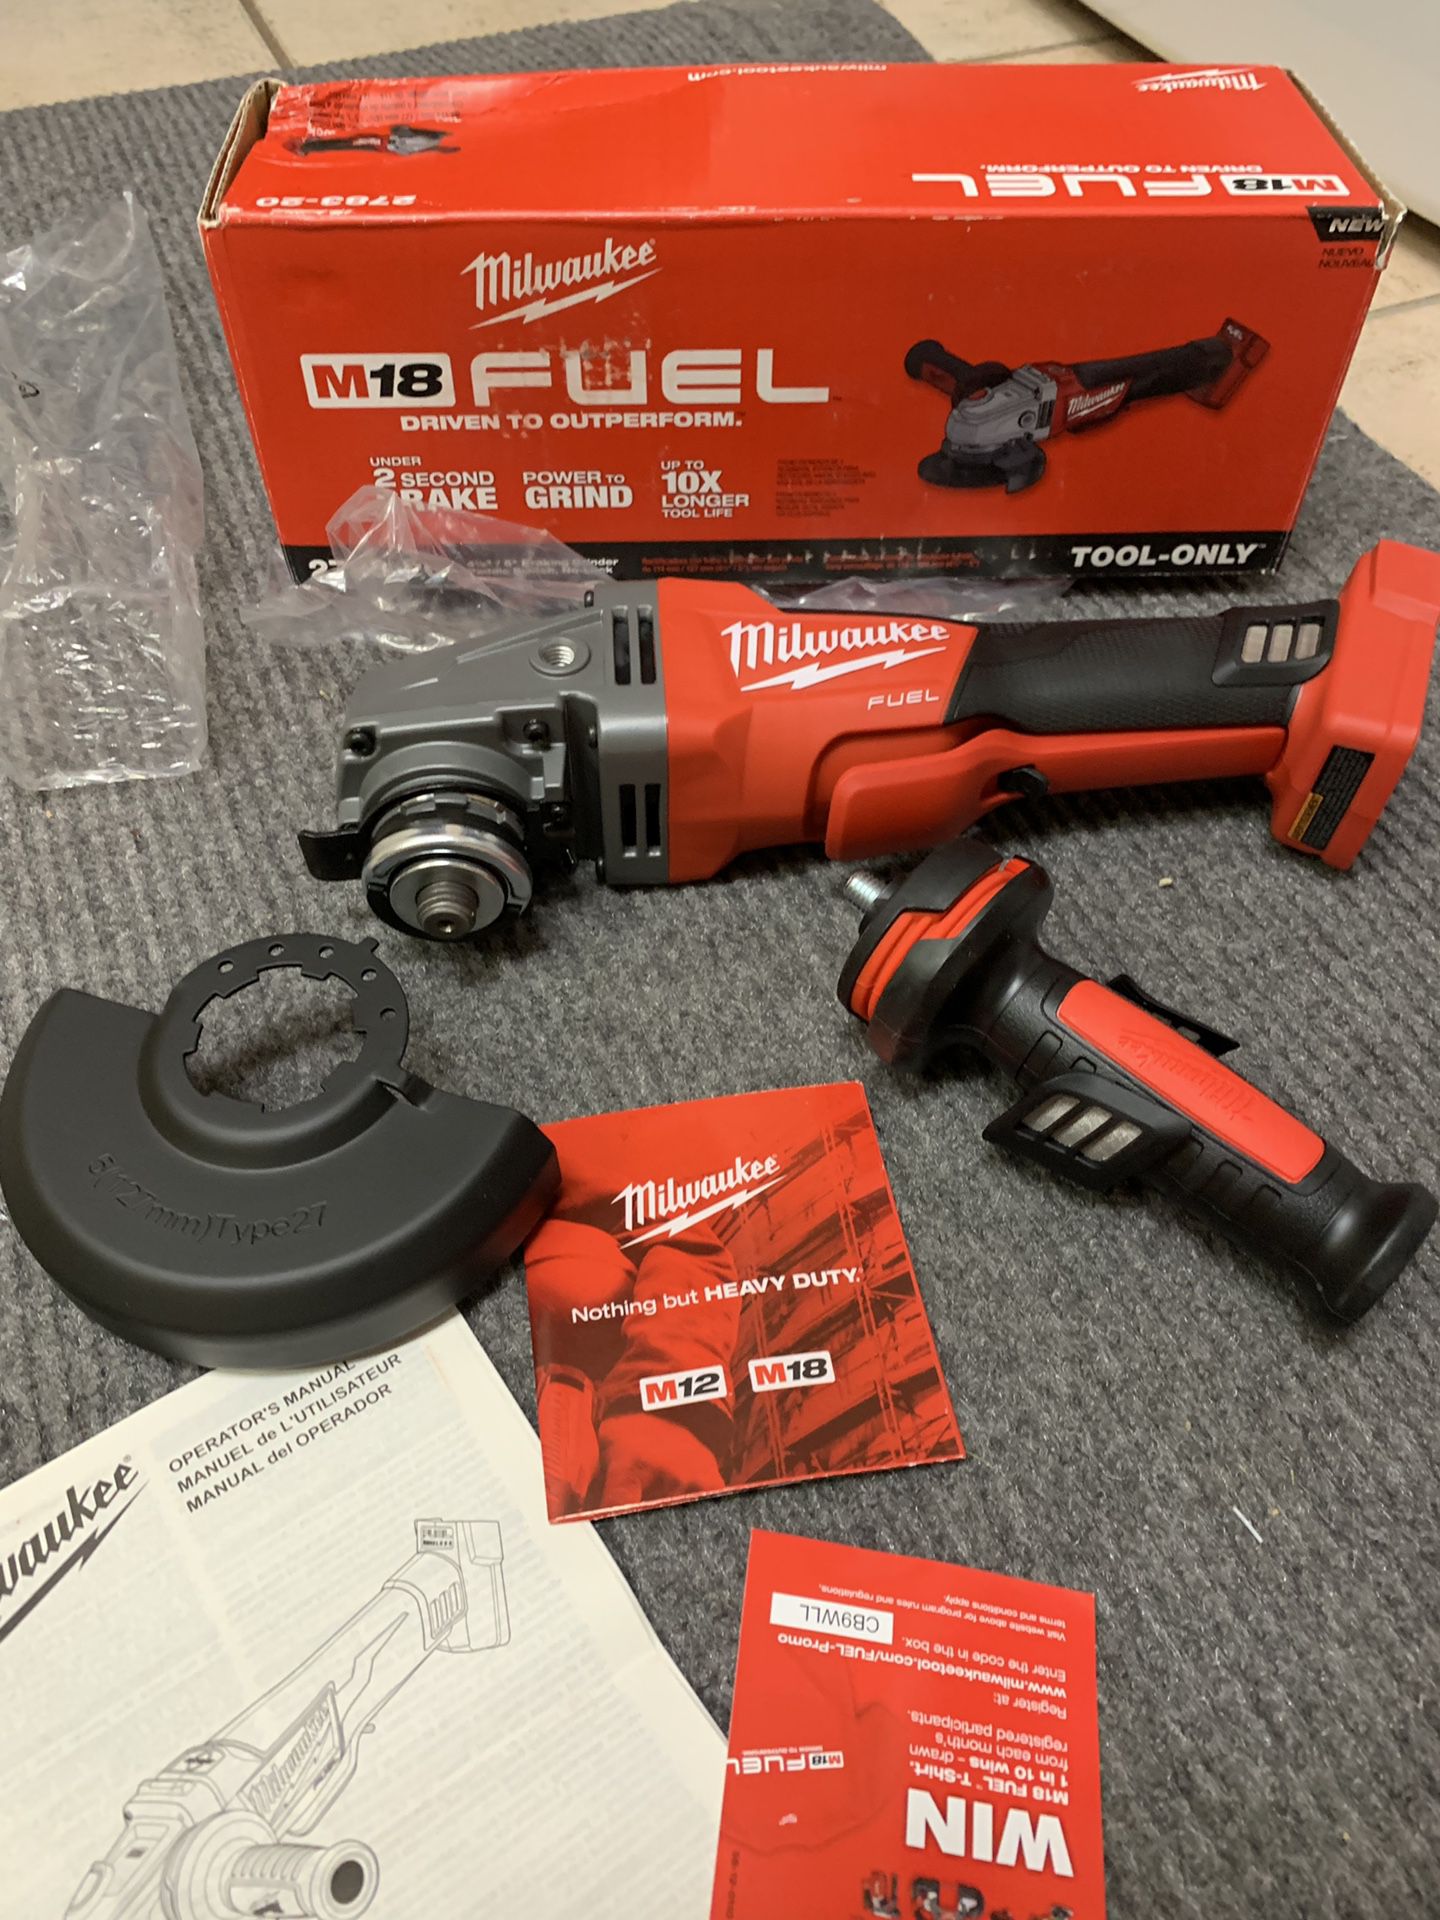 Milwaukee M18 Fuel 4 1/2 -5” Braking Grinder Cordless with Paddle Switch Model 2783-20 Brushless motor New w/ Warranty price is for each